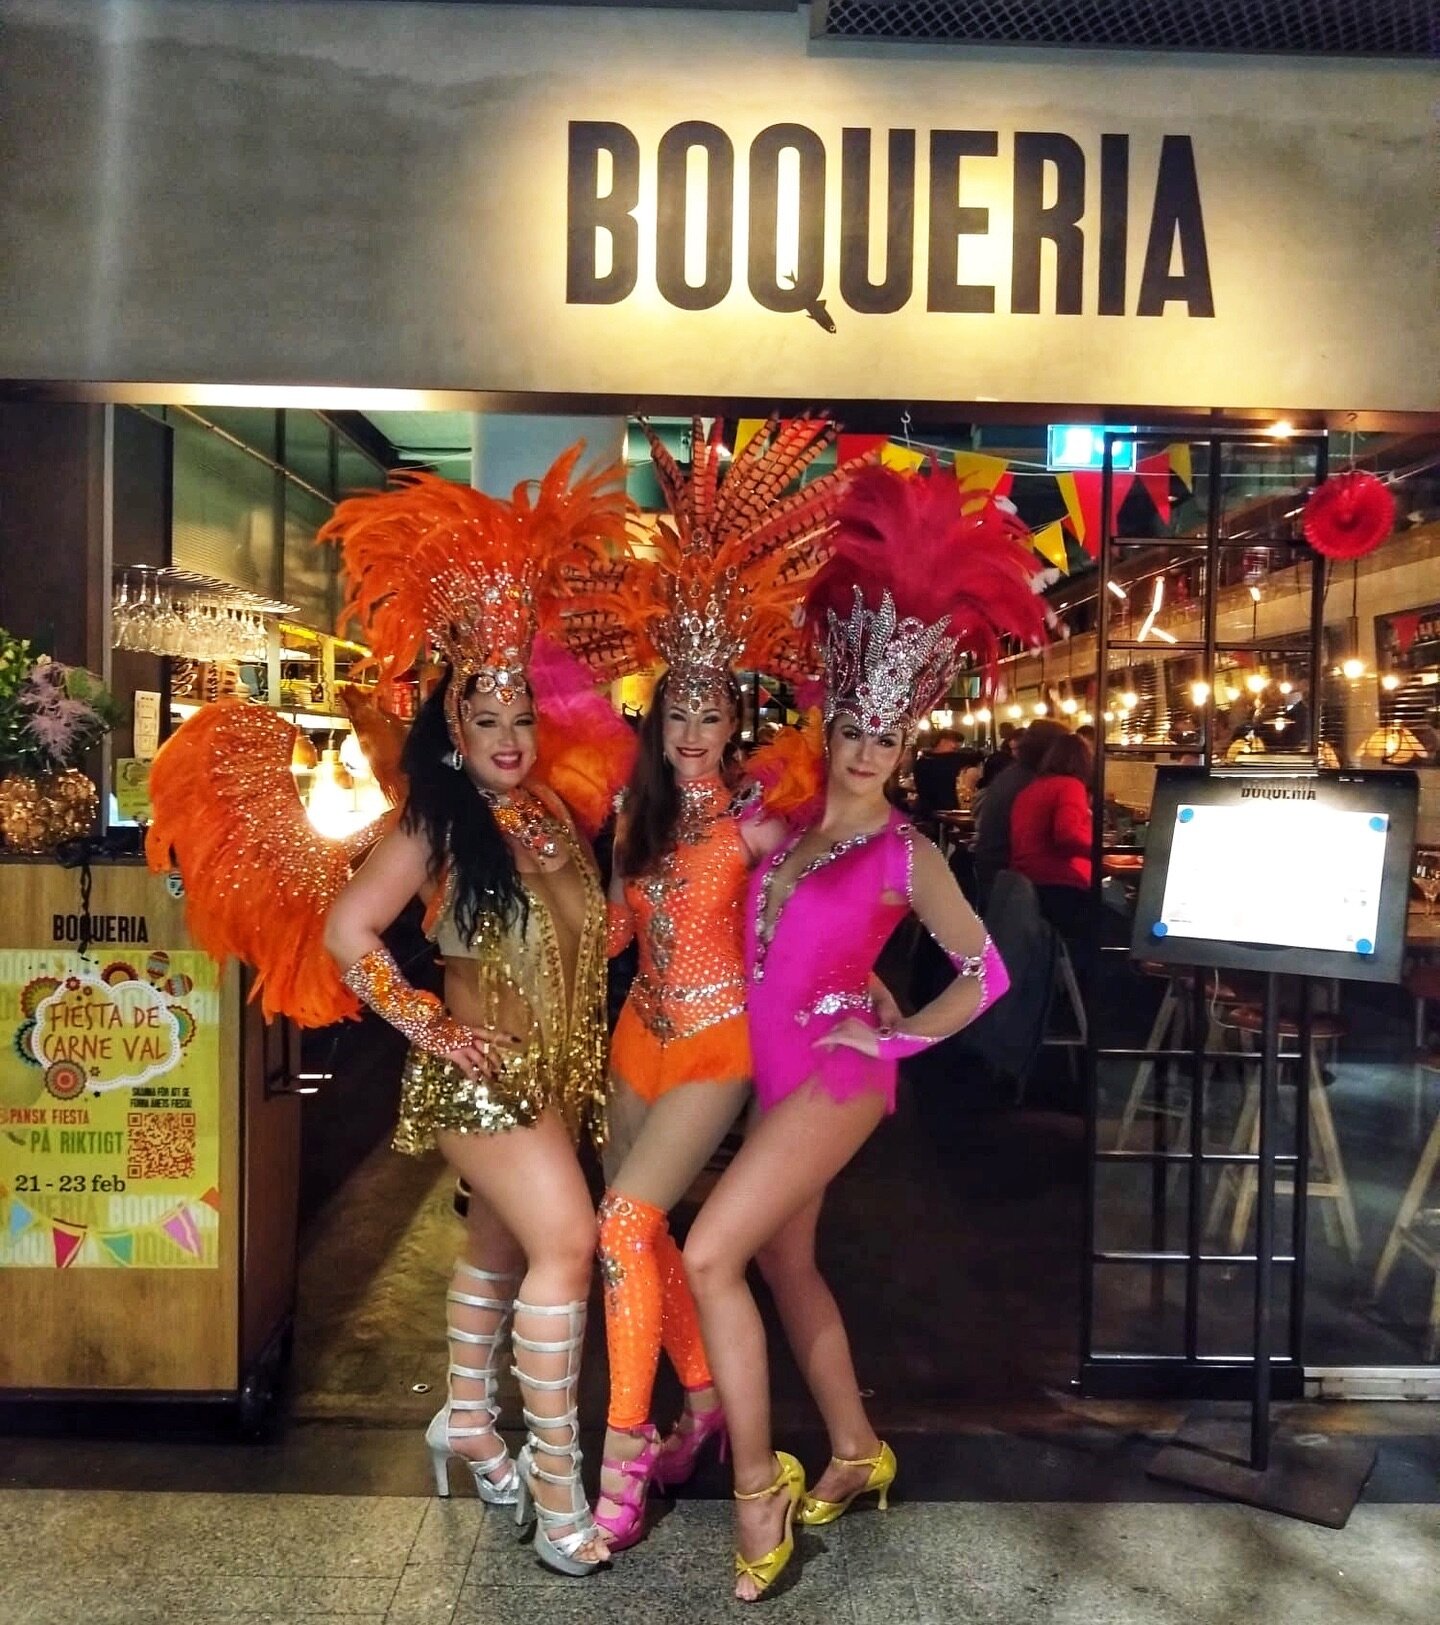 Wow what an amazing 3 day fiesta de Carneval we had performing at @boqueria.stockholm last week! Thank you to everybody that came and danced with us! Samba really brings people together💕🎉

#samba #sambadancers #sambadansare #boqueria #boqueriastock